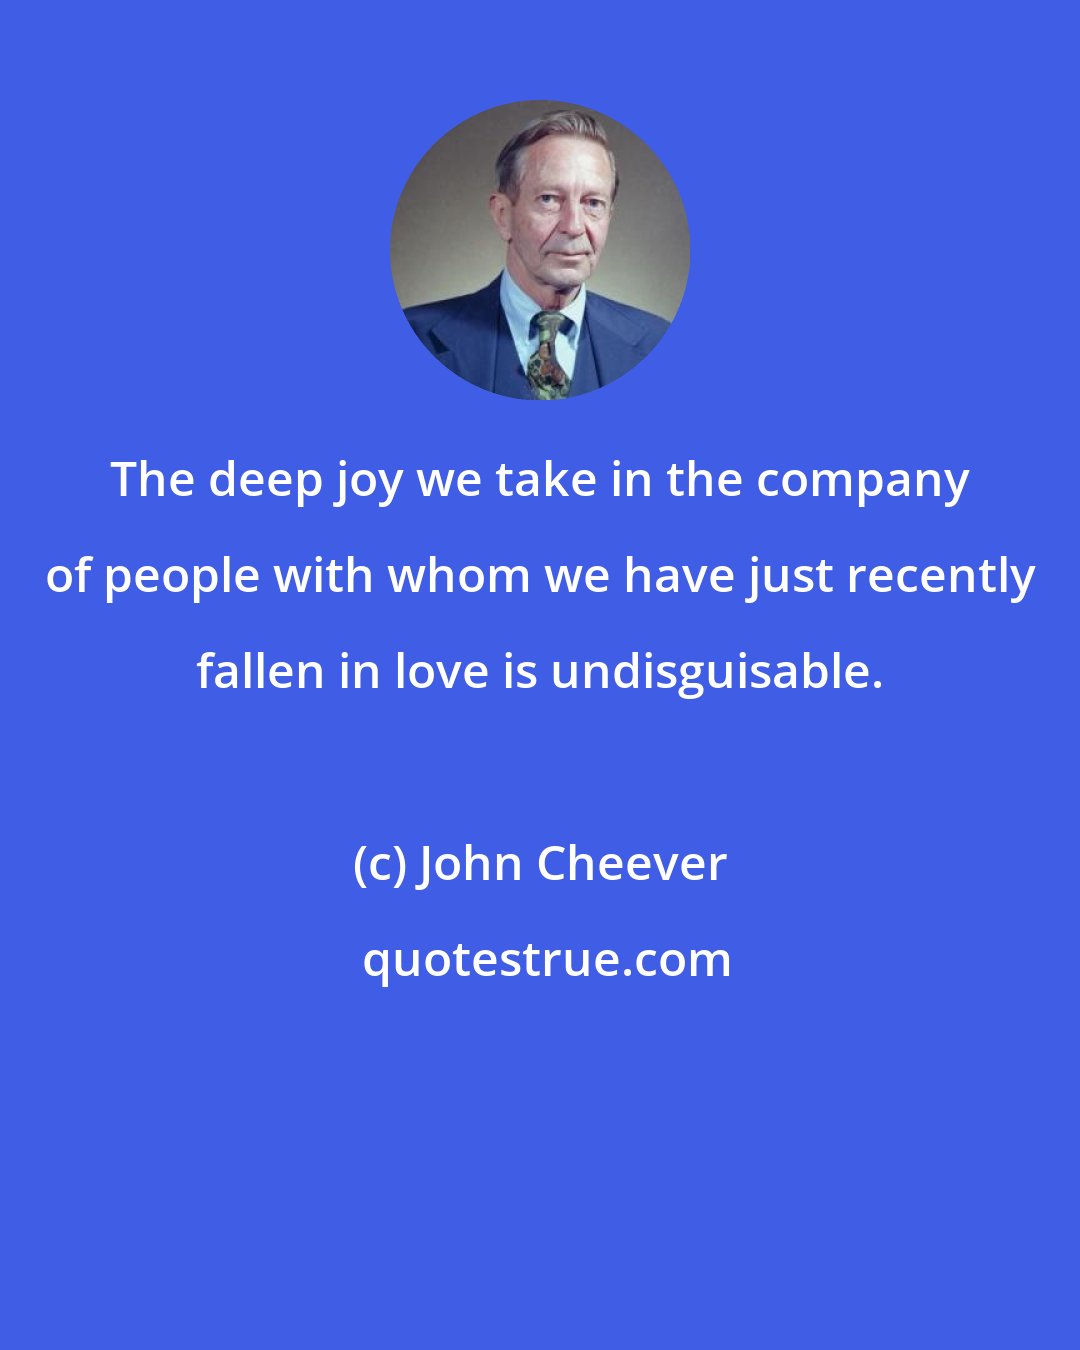 John Cheever: The deep joy we take in the company of people with whom we have just recently fallen in love is undisguisable.